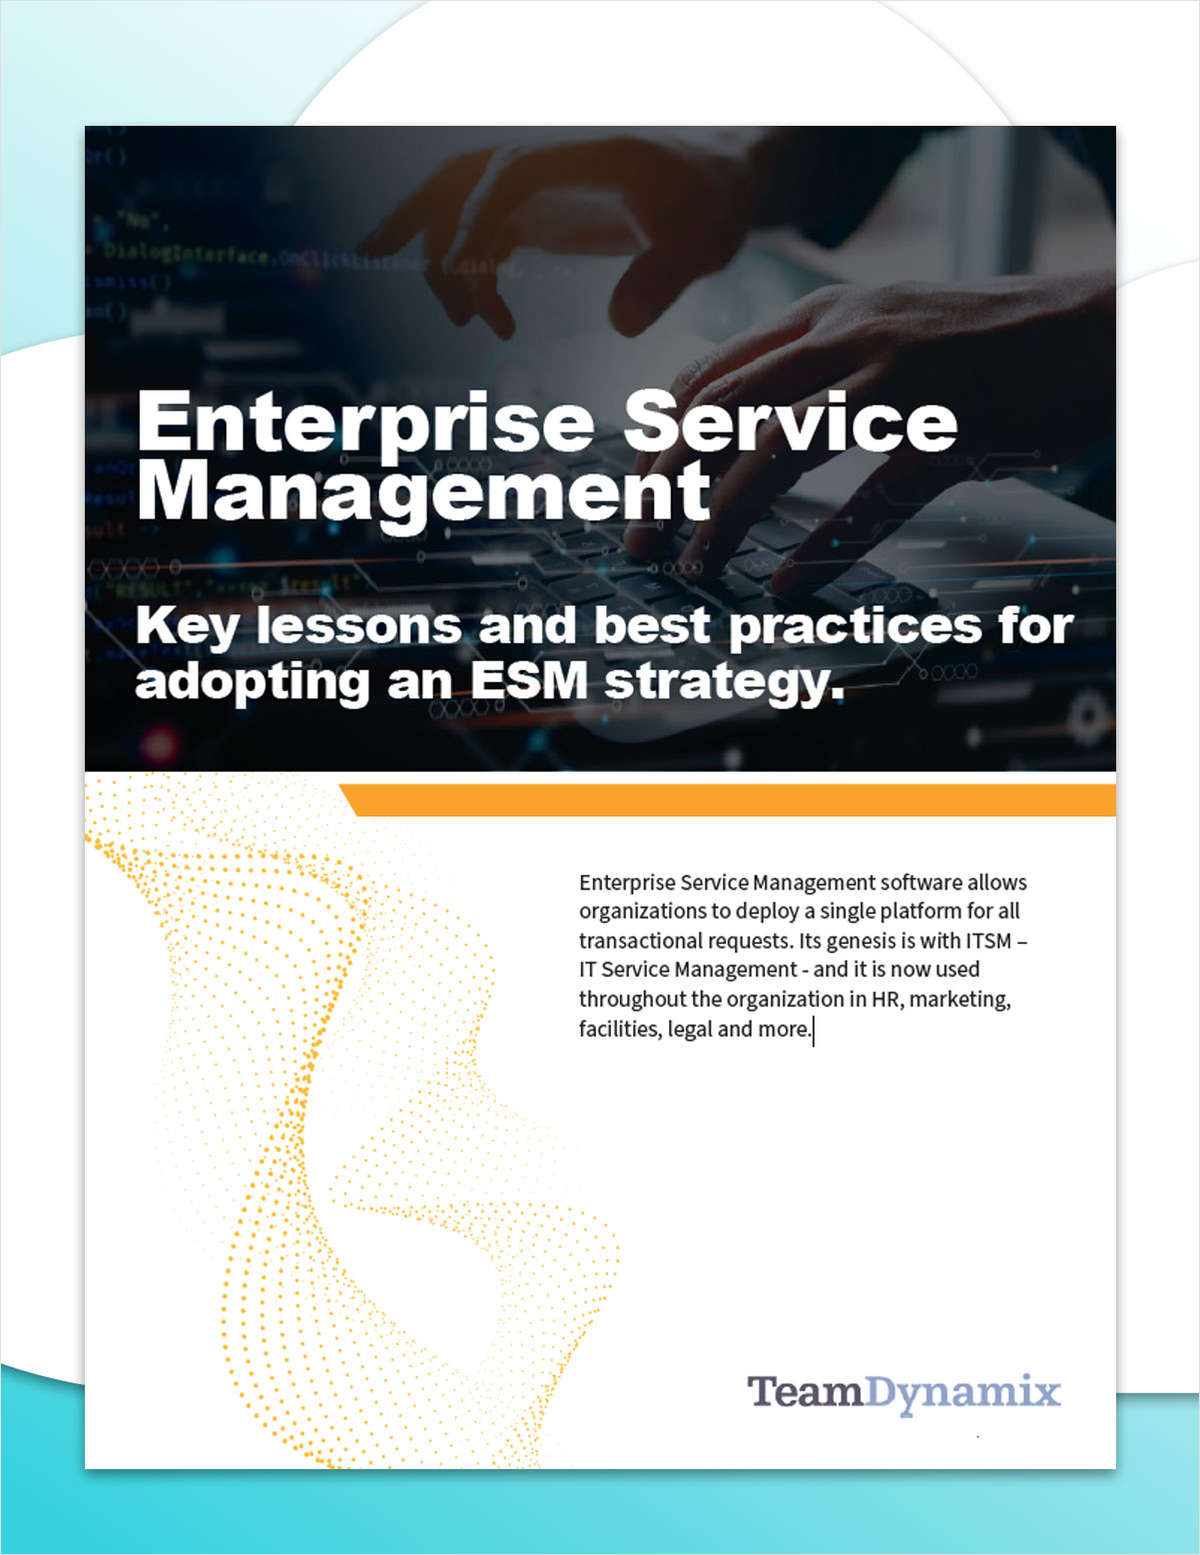 Going Beyond IT | IT Service Management for the Enterprise